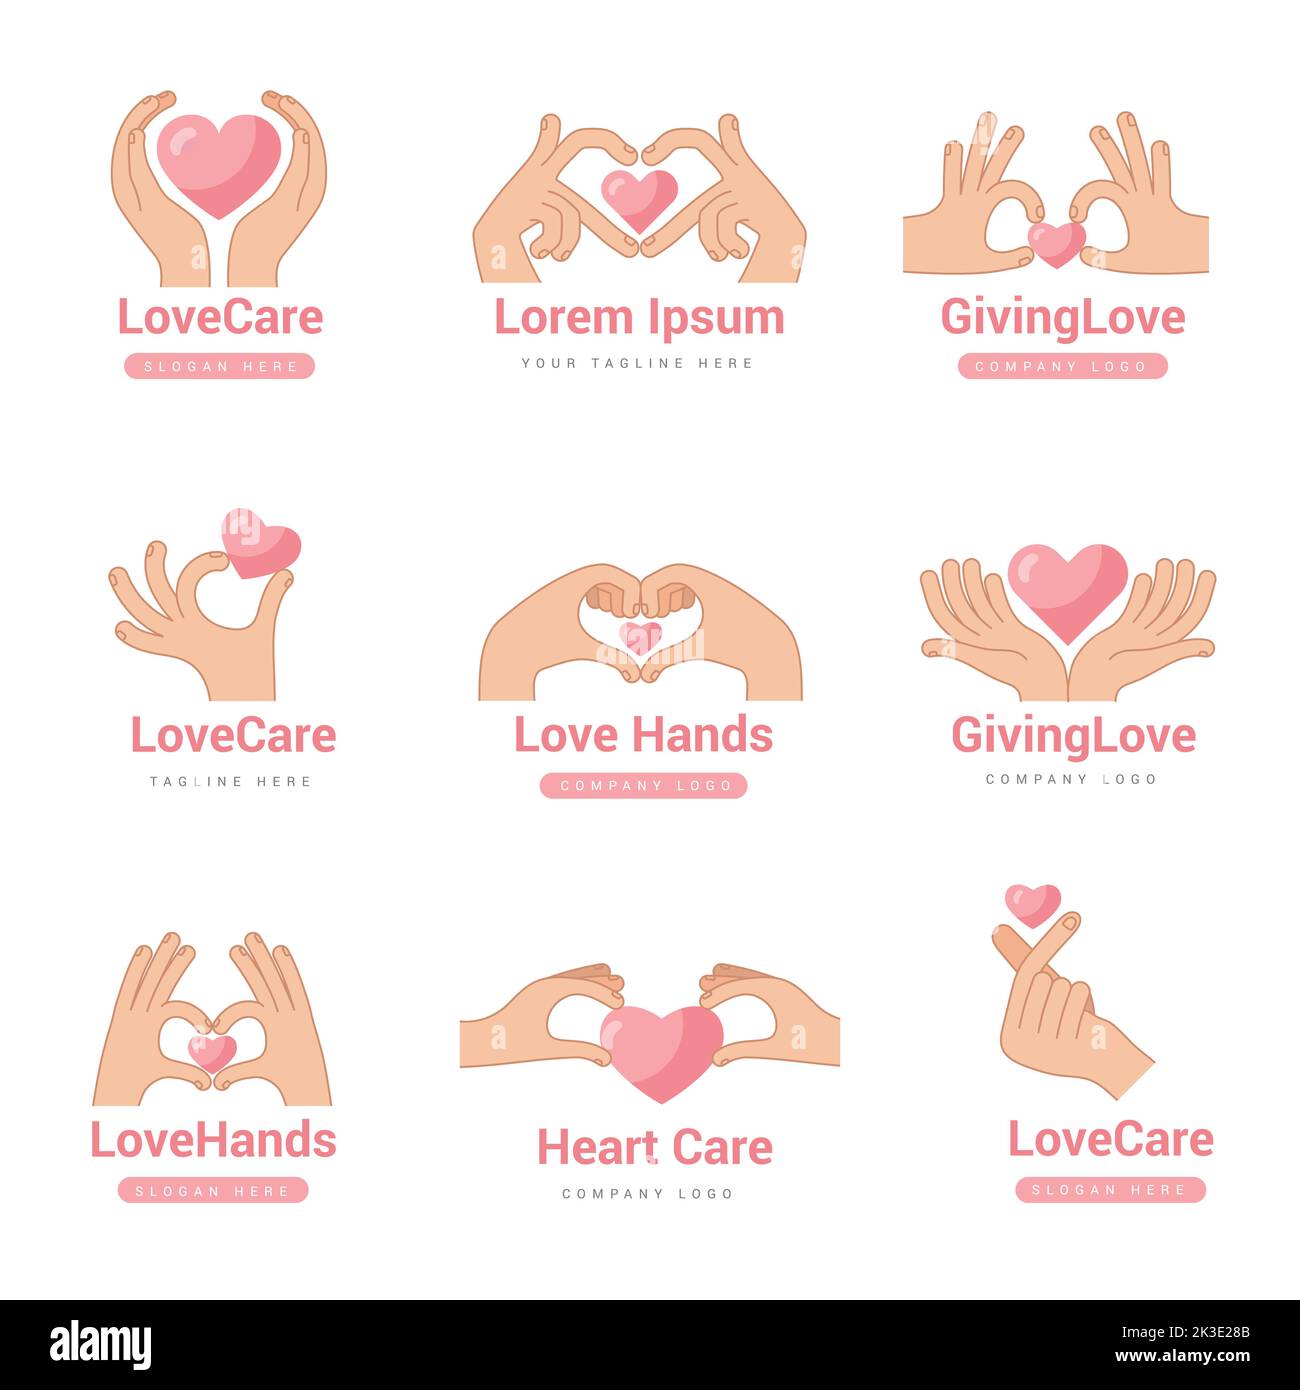 Hands hearts. Donation love and helping symbols recent vector stylizing pictures for friendship and happiness Stock Vector